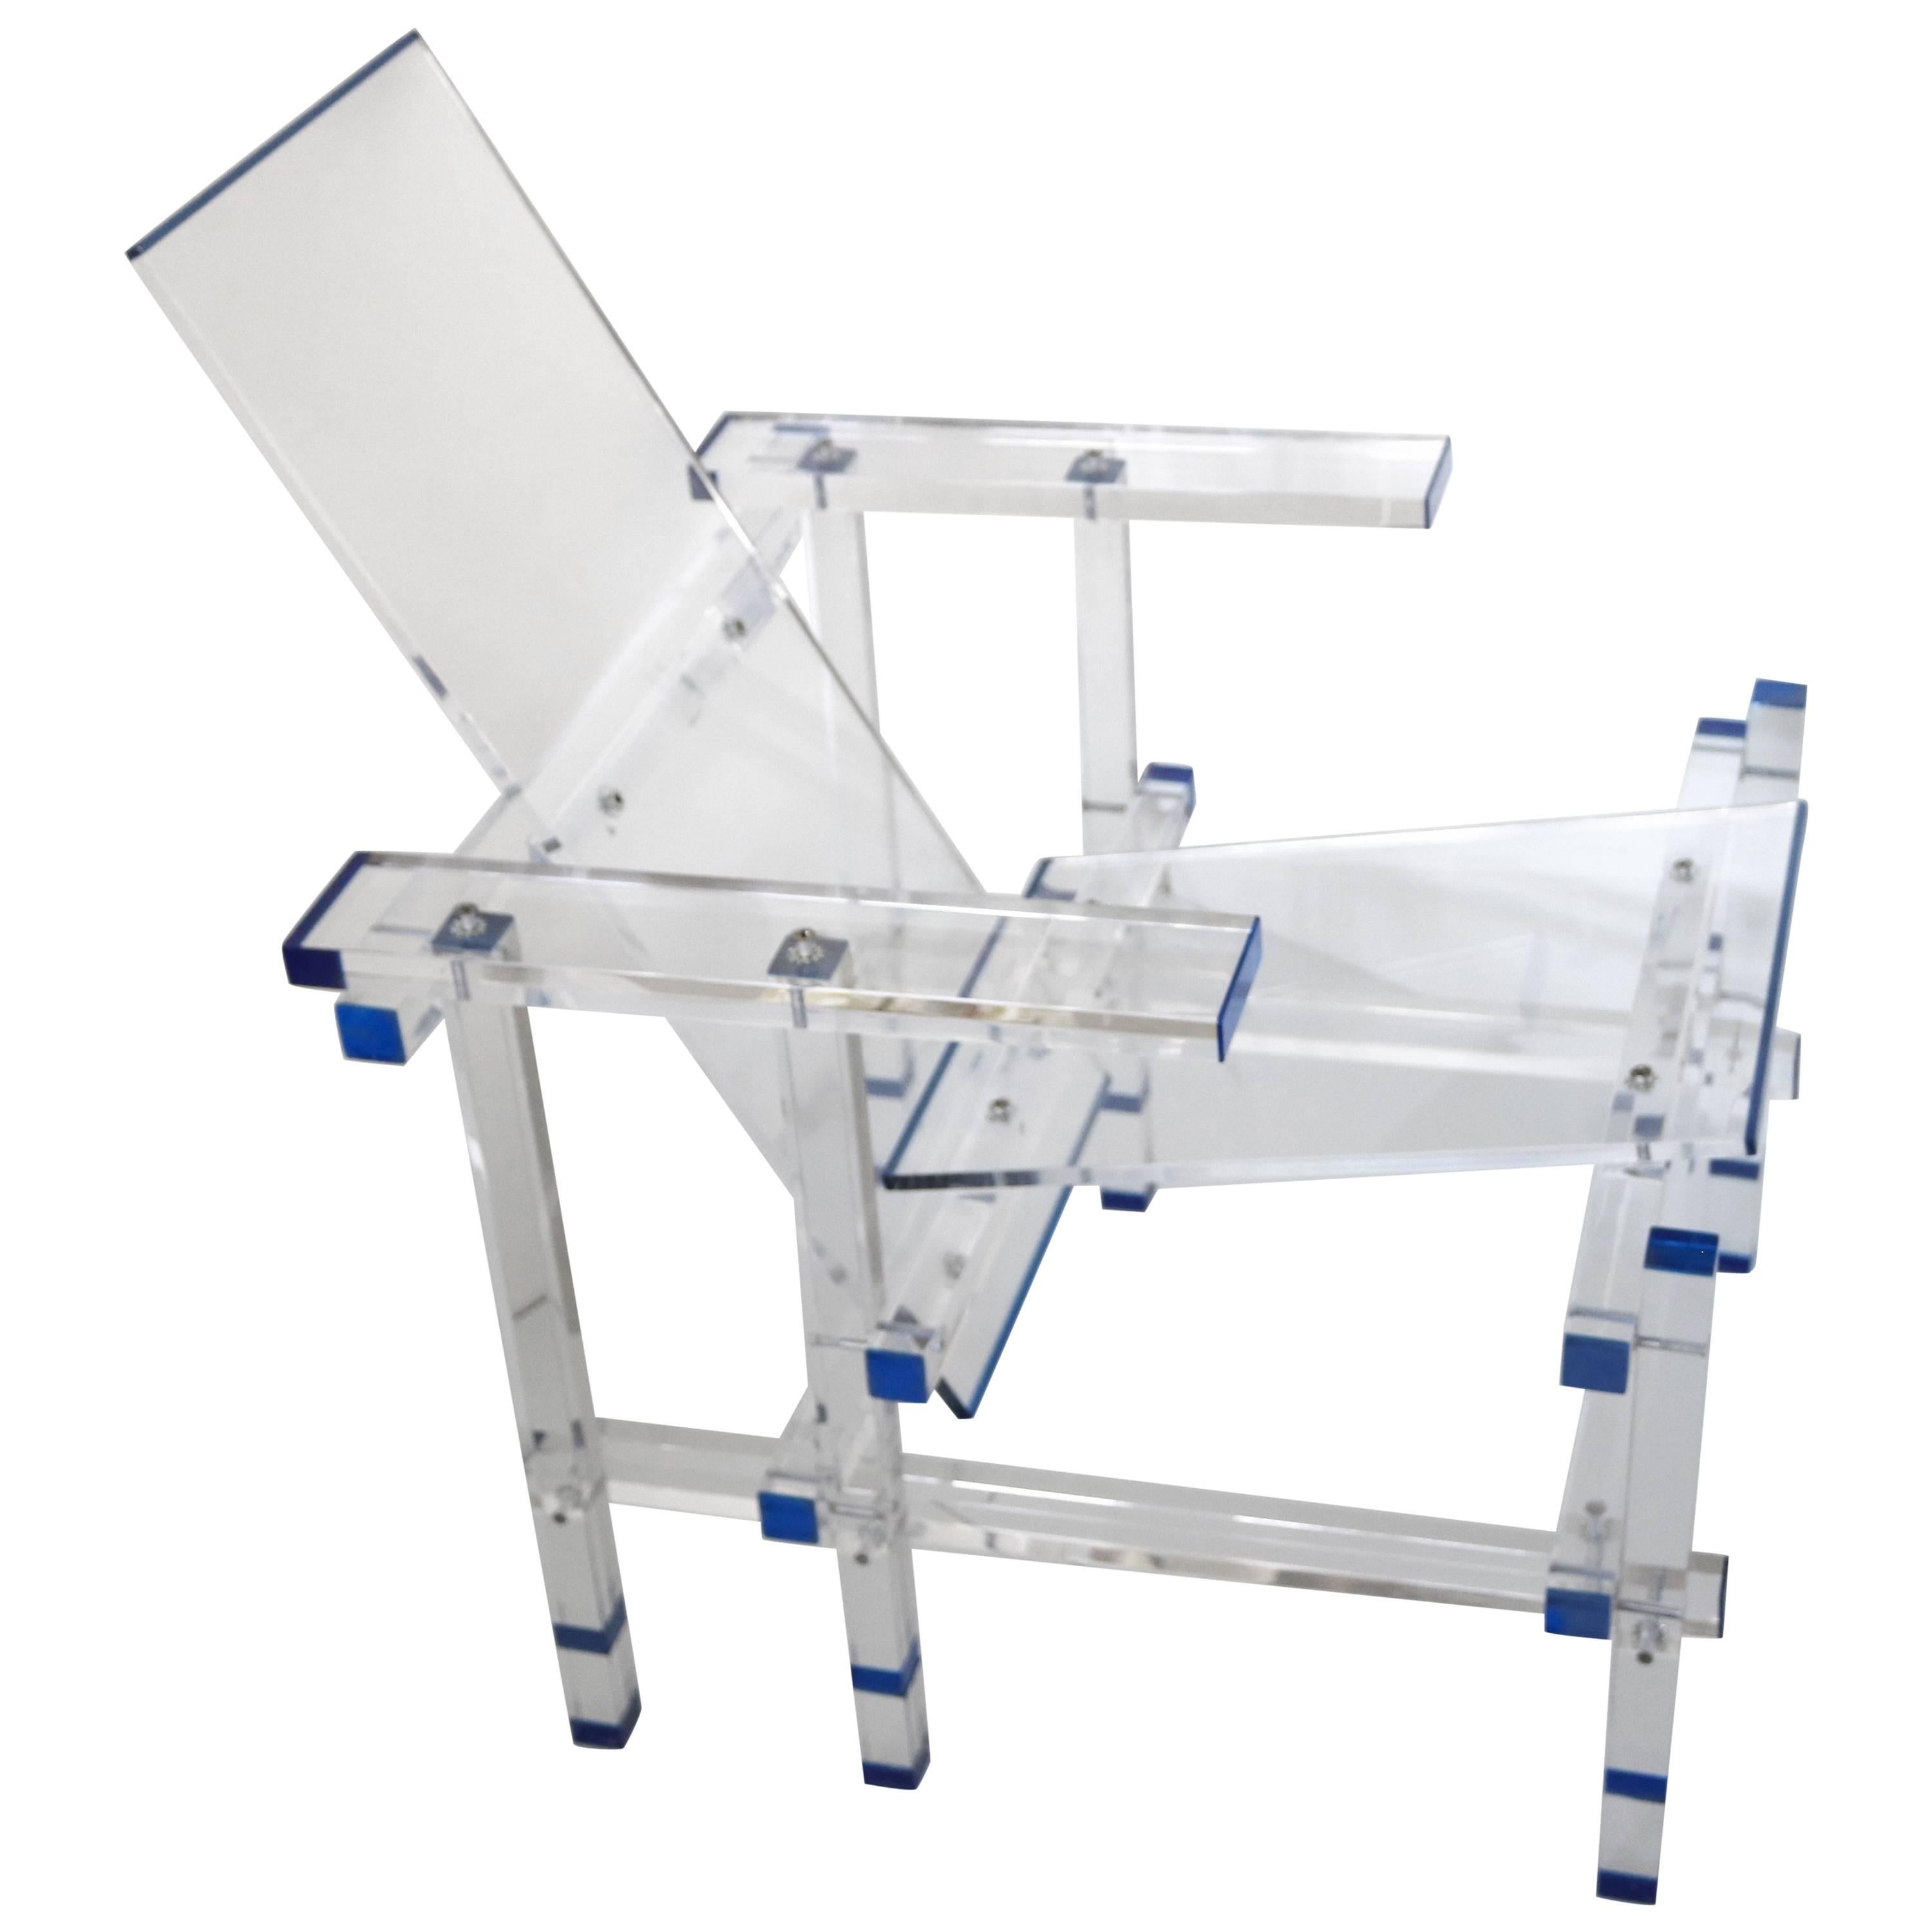 A Statement power chair for a chic modernist, this is fabricated by a superb artisan craftsman in a very limited edition.

Functional art- a beautifully designed and executed American clear transparent Lucite Acrylic Lounge chair with a geometric